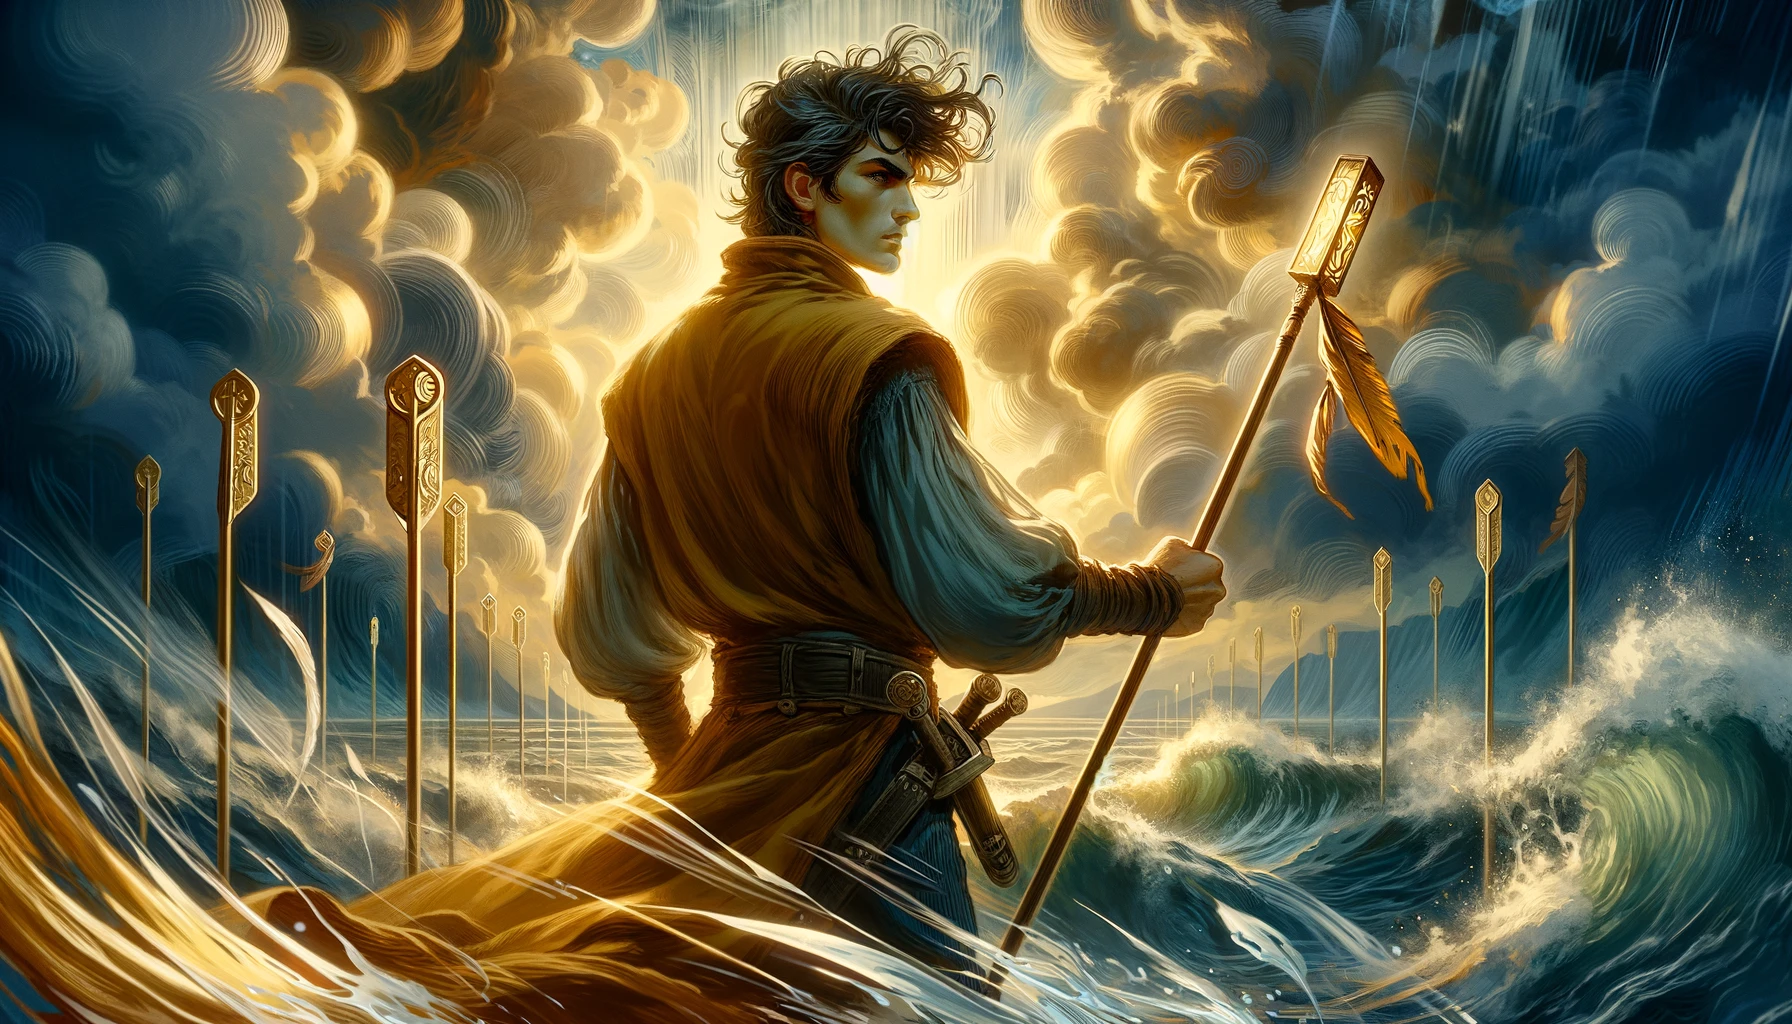 The image features a person with a determined and fierce expression, symbolizing the emotional intensity of standing one's ground. They embody the spirit of the Seven of Wands, exuding courage, perseverance, and passionate commitment to their cause. The backdrop depicts a tumultuous scene, reflecting external pressures and internal turmoil associated with such a stance. Overall, the visual representation highlights the resilience required in the face of challenges and the unwavering determination to defend one's beliefs.